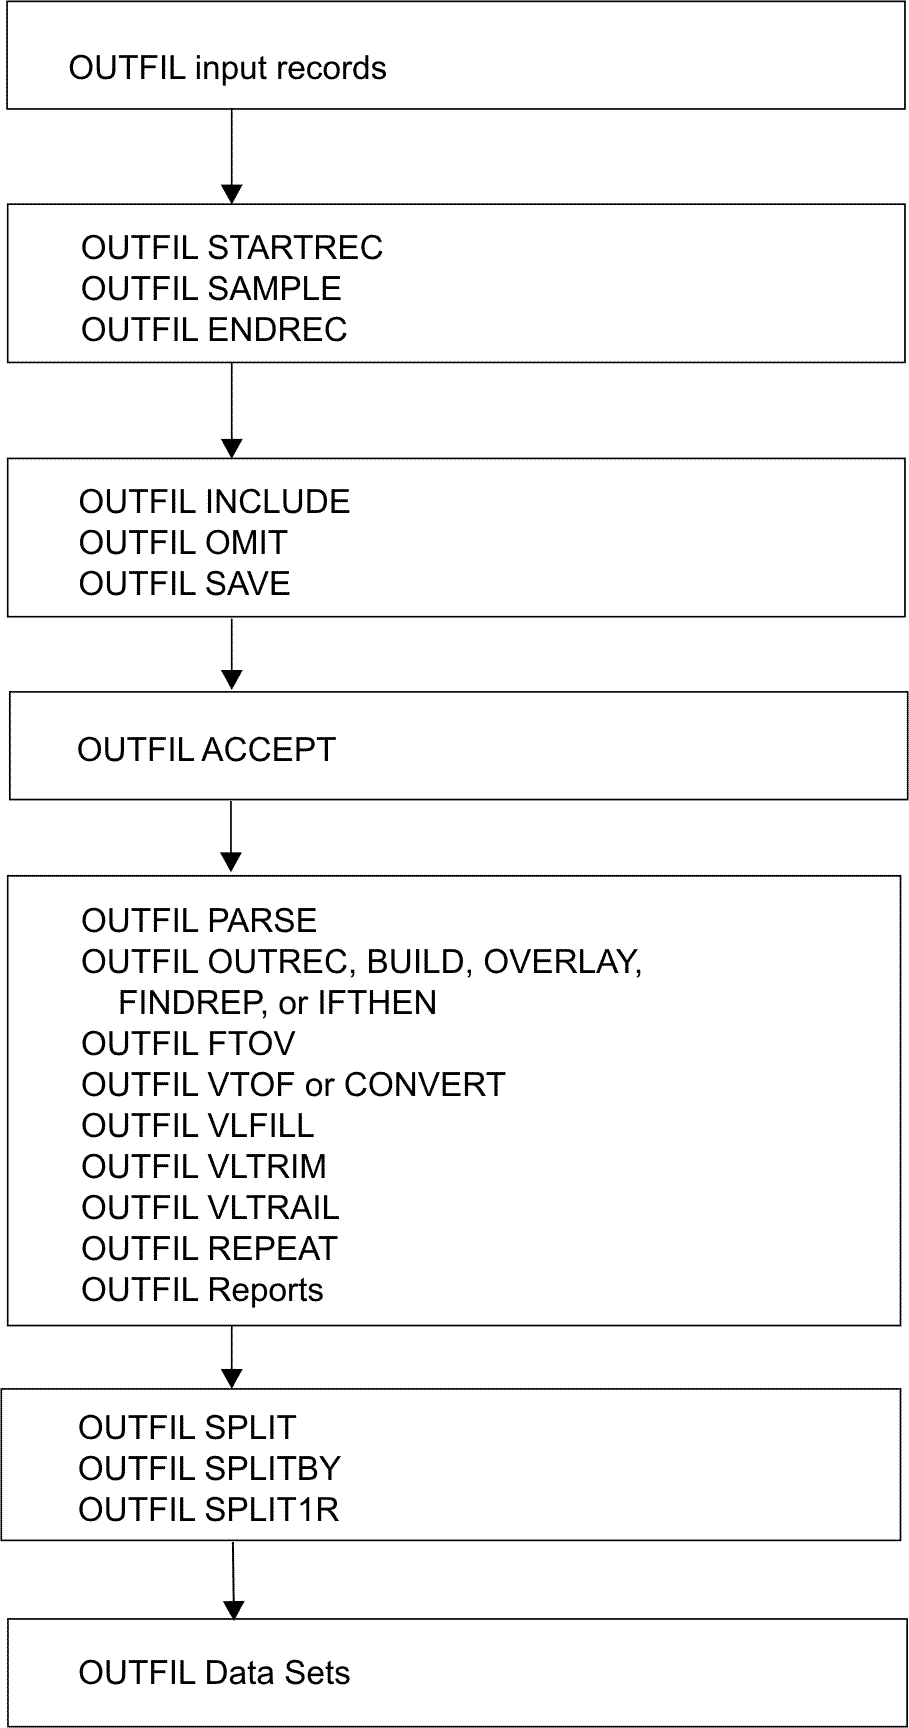 OUTFIL Processing Order